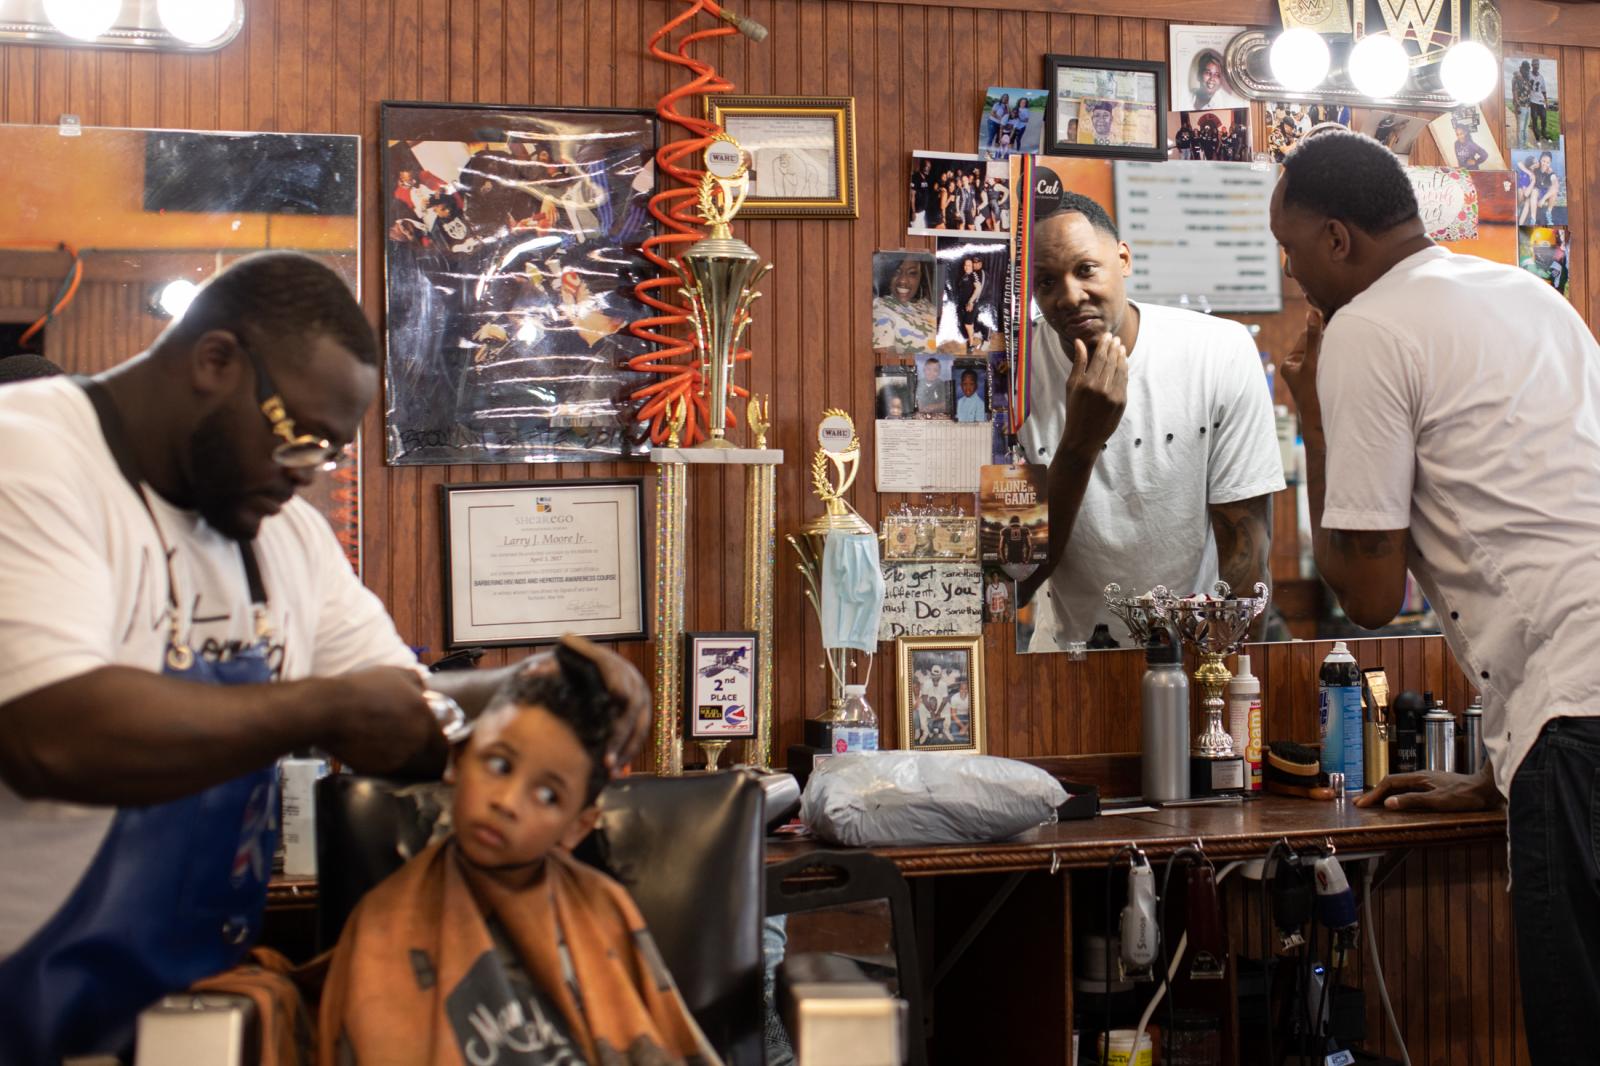 Larry Moore cuts Marcus Douthit...Life on the Edge Barber Lounge.